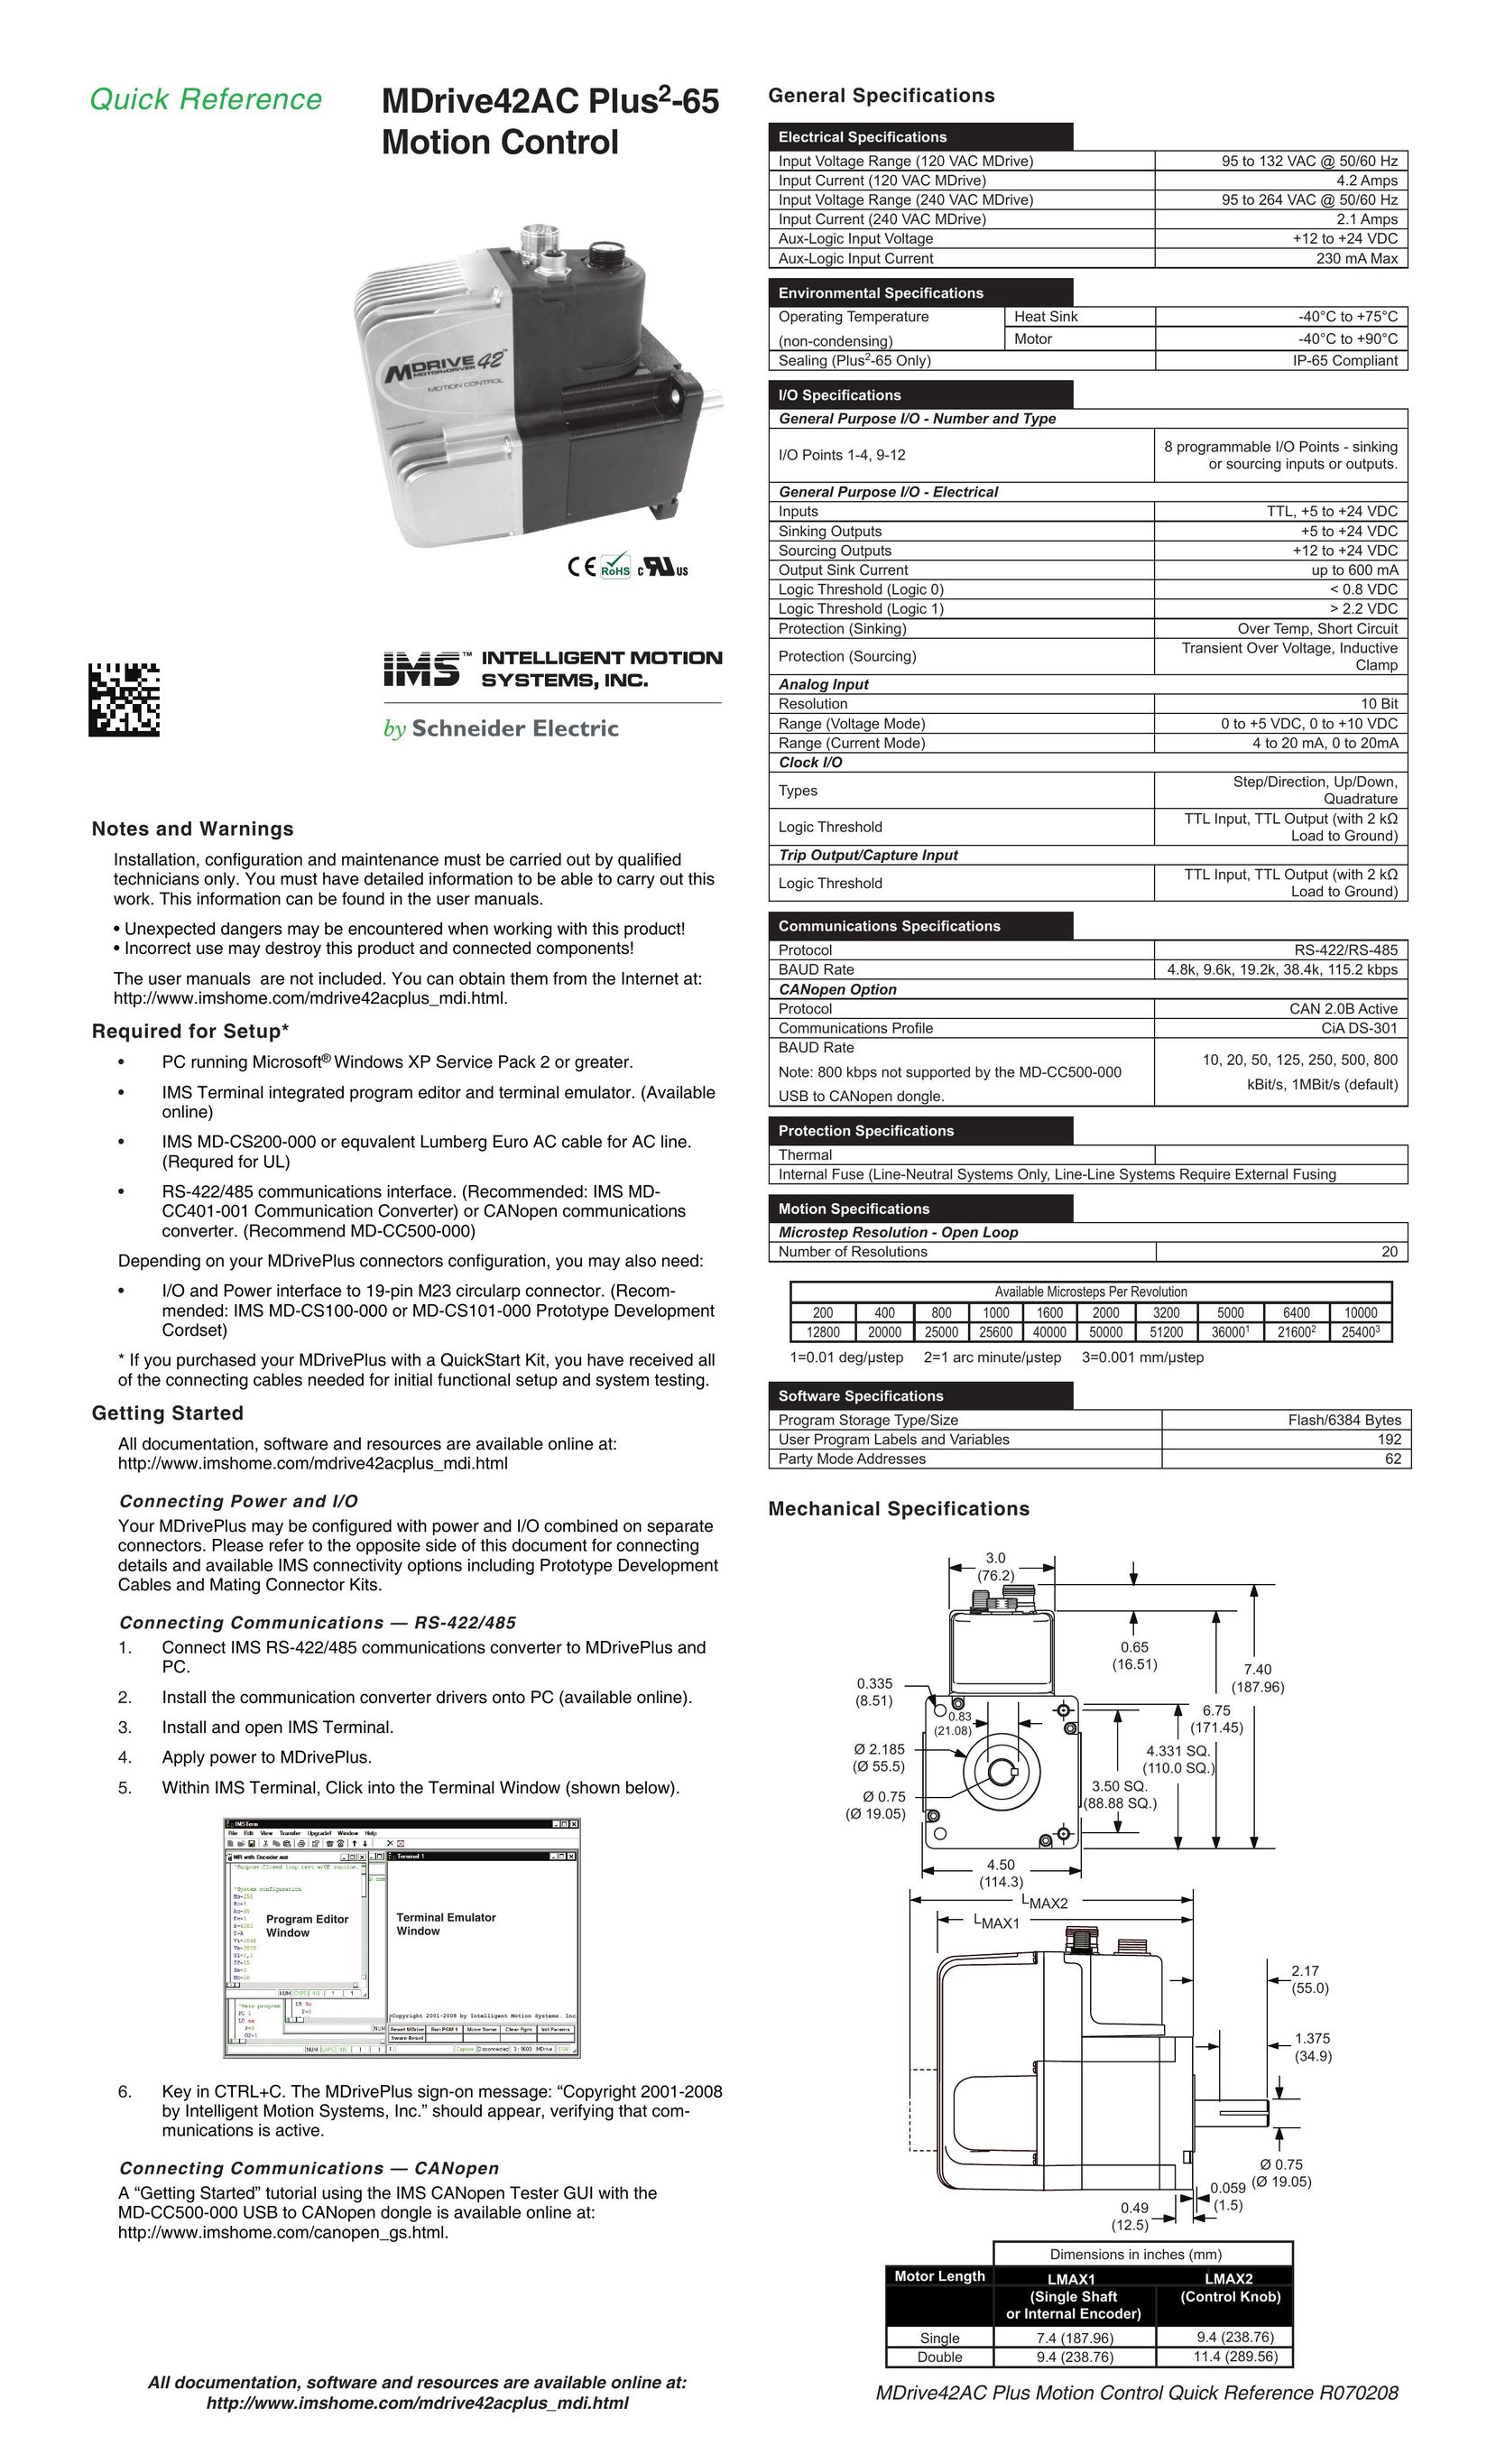 Intelligent Motion Systems MDrive42AC Home Safety Product User Manual